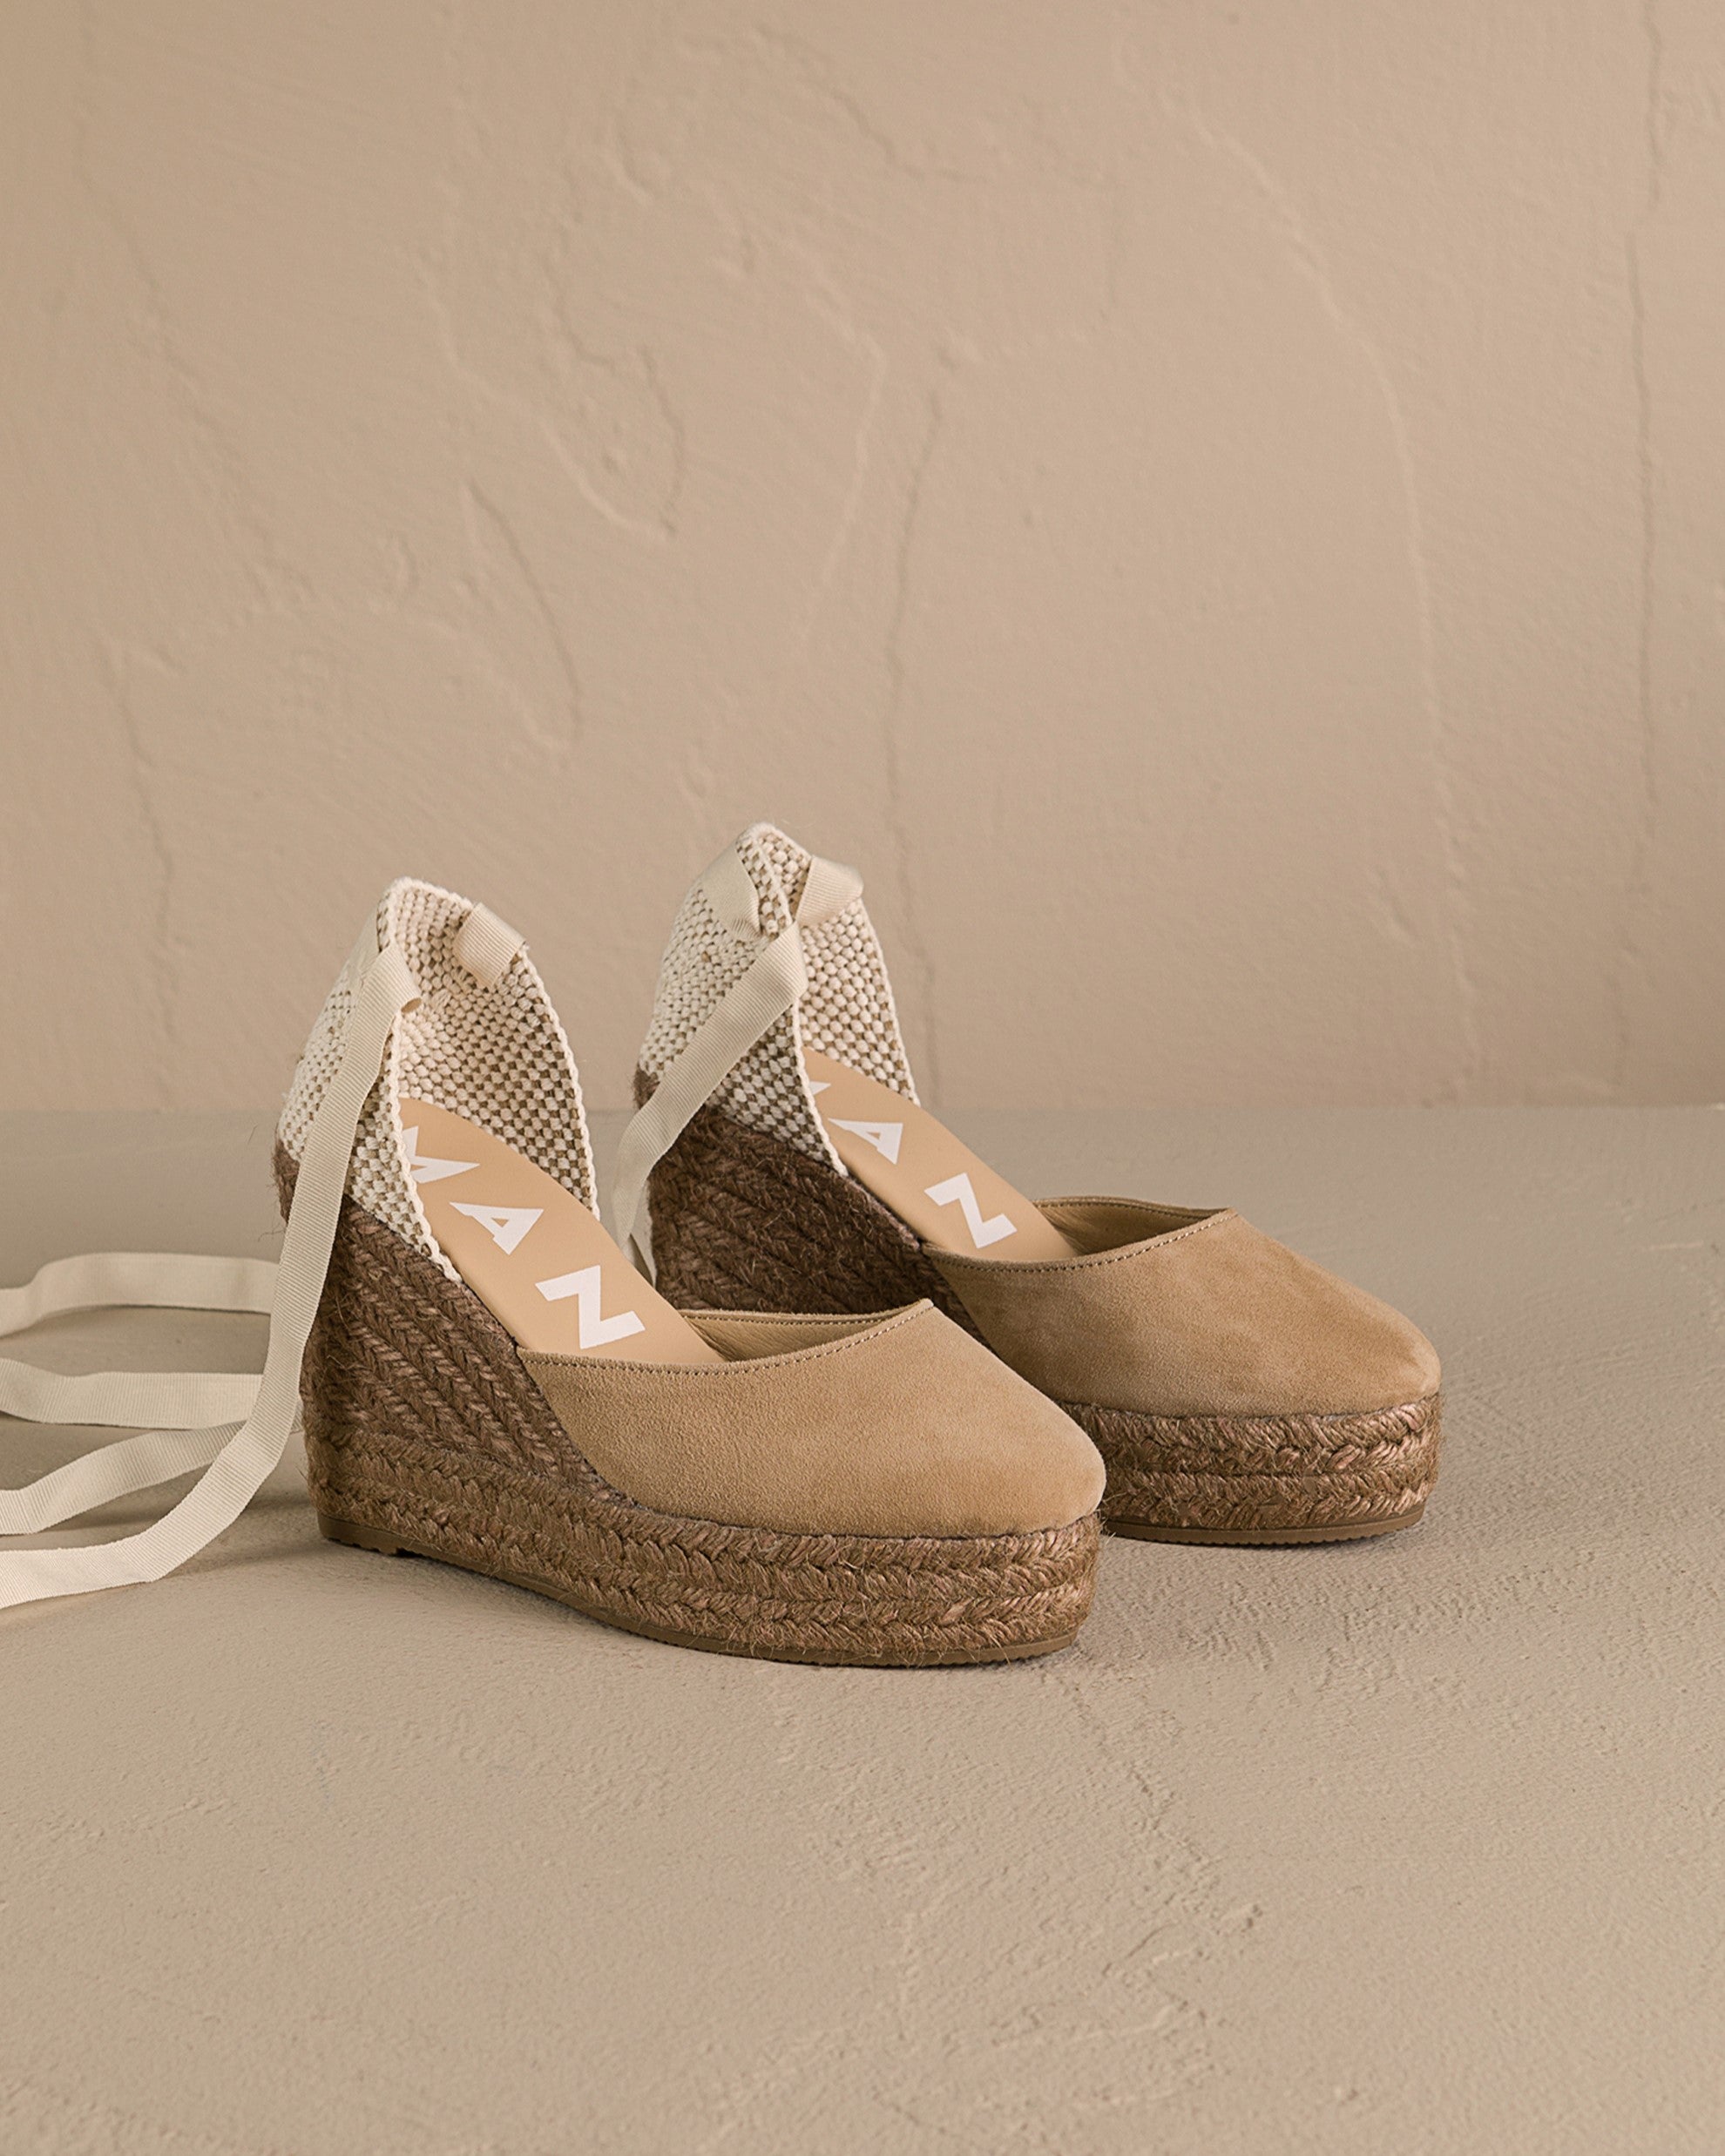 Soft Suede Wedge Espadrilles - Hamptons Vintage Taupe On Tone